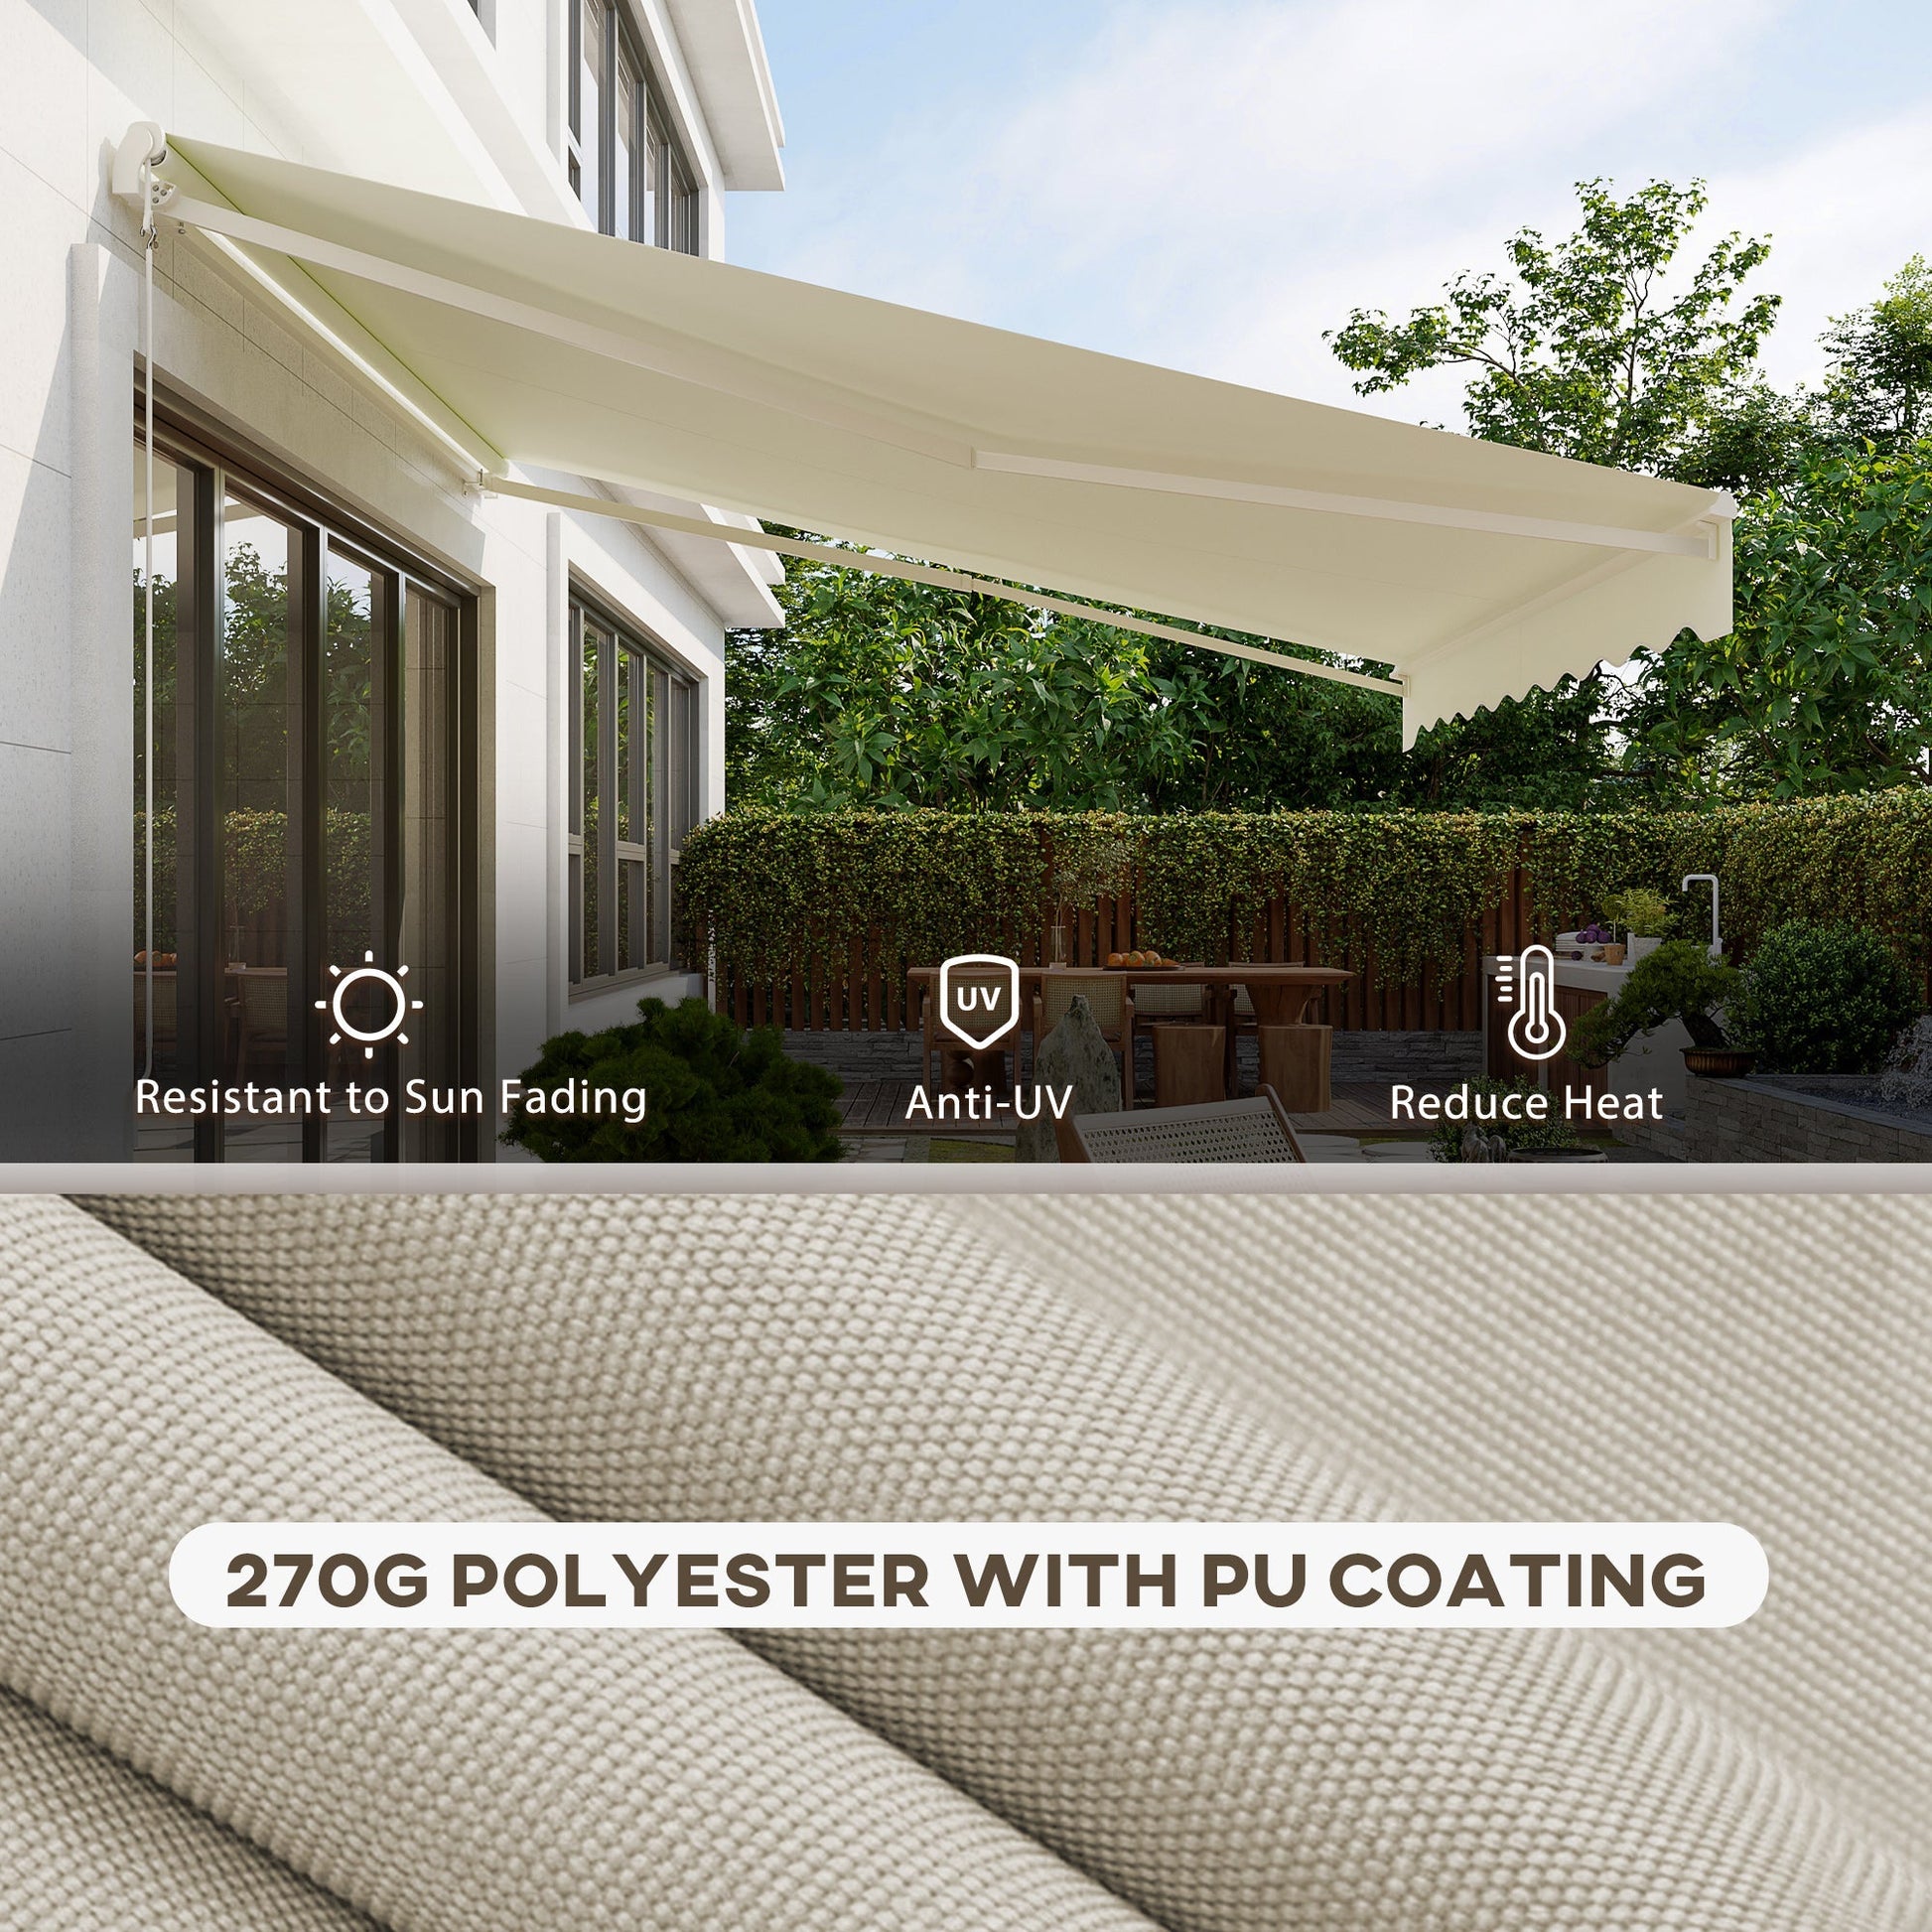 12'x10' Electric Retractable Awning, UV Protection Sun Shade Shelter w/ Remote Controller for Deck Balcony Yard, Cream - Gallery Canada